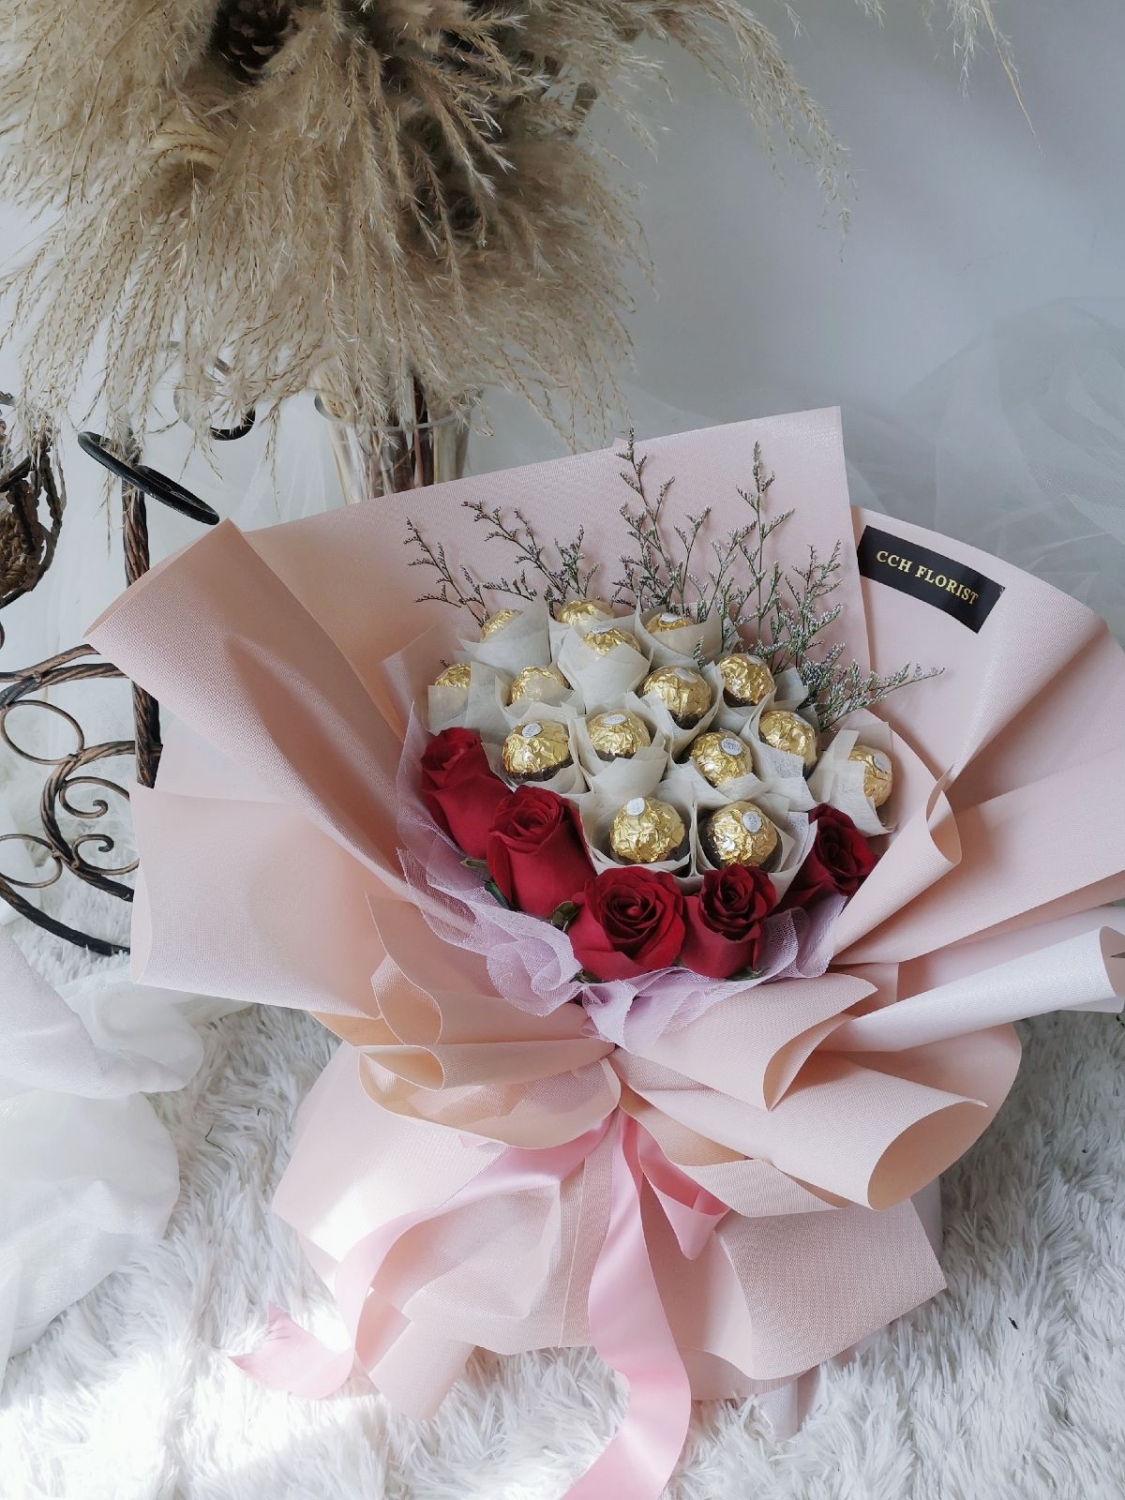 CHOCO LOVE ROSE ALL BOUQUETS BOUQUET Melaka, Malaysia Supplier ...